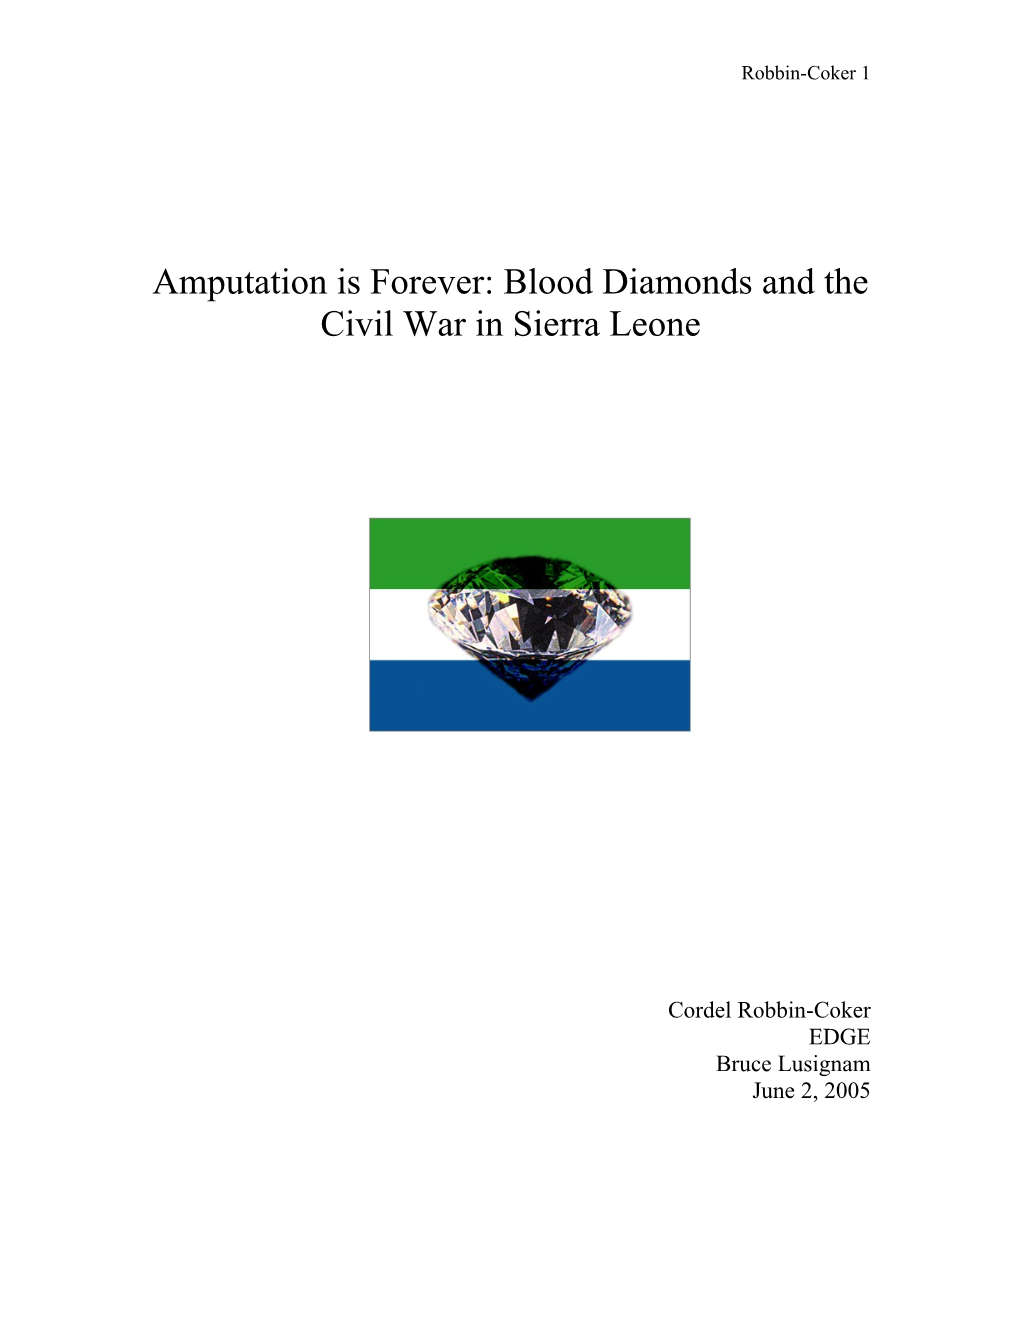 Diamonds Are Forever: Blood Diamonds and the Civil War in Sierra Leone